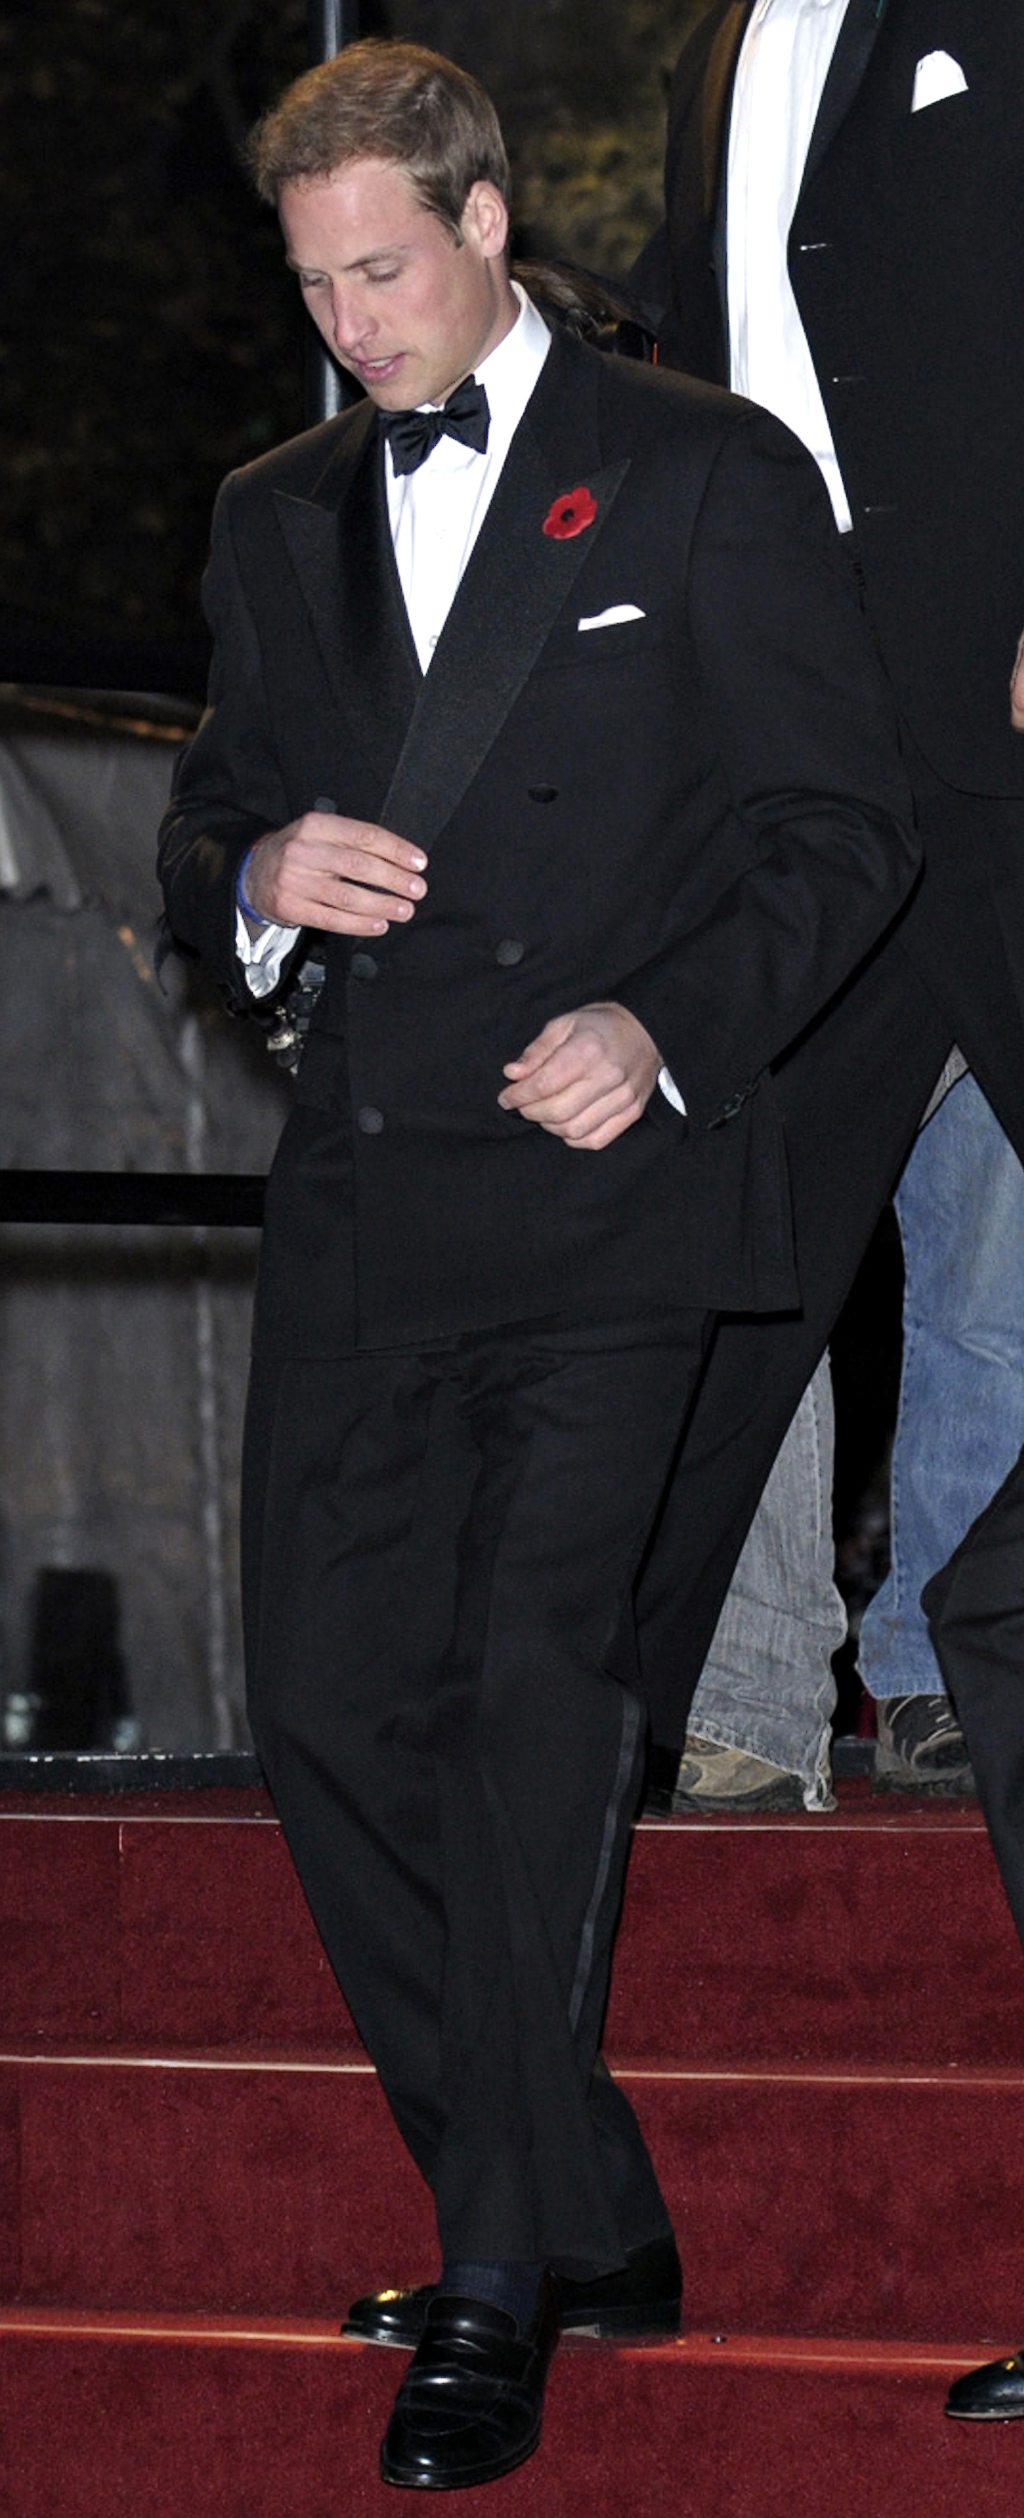 Prince William attends the premiere of the Bond movie "Quantum of Solace", immaculately attired in a double breasted coat in Black Tie. 